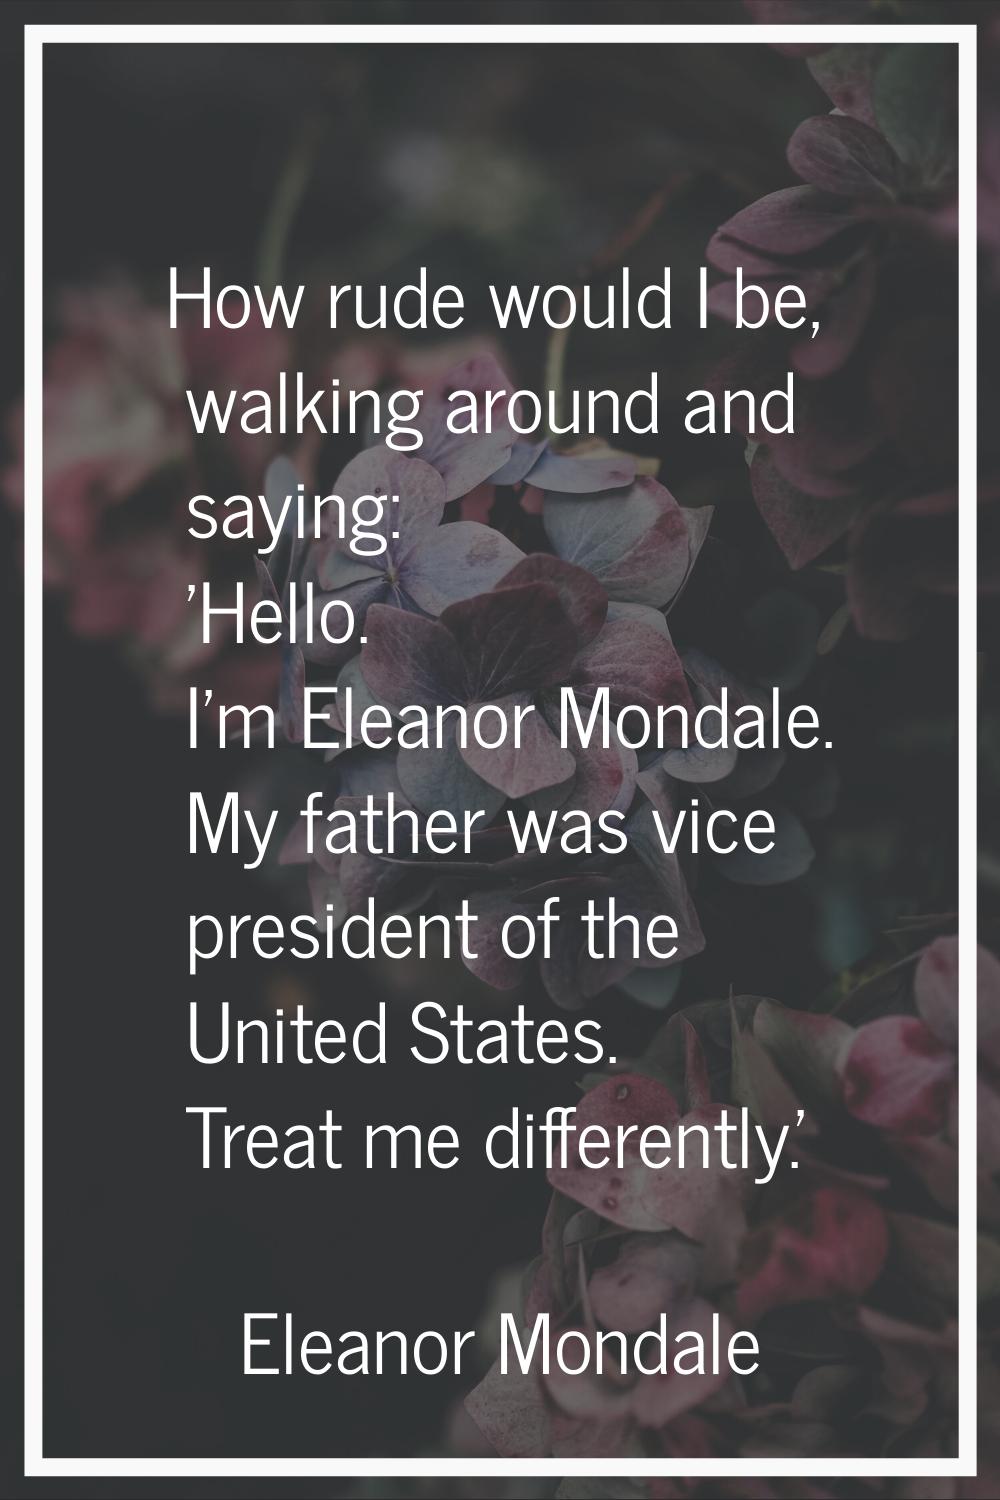 How rude would I be, walking around and saying: 'Hello. I'm Eleanor Mondale. My father was vice pre